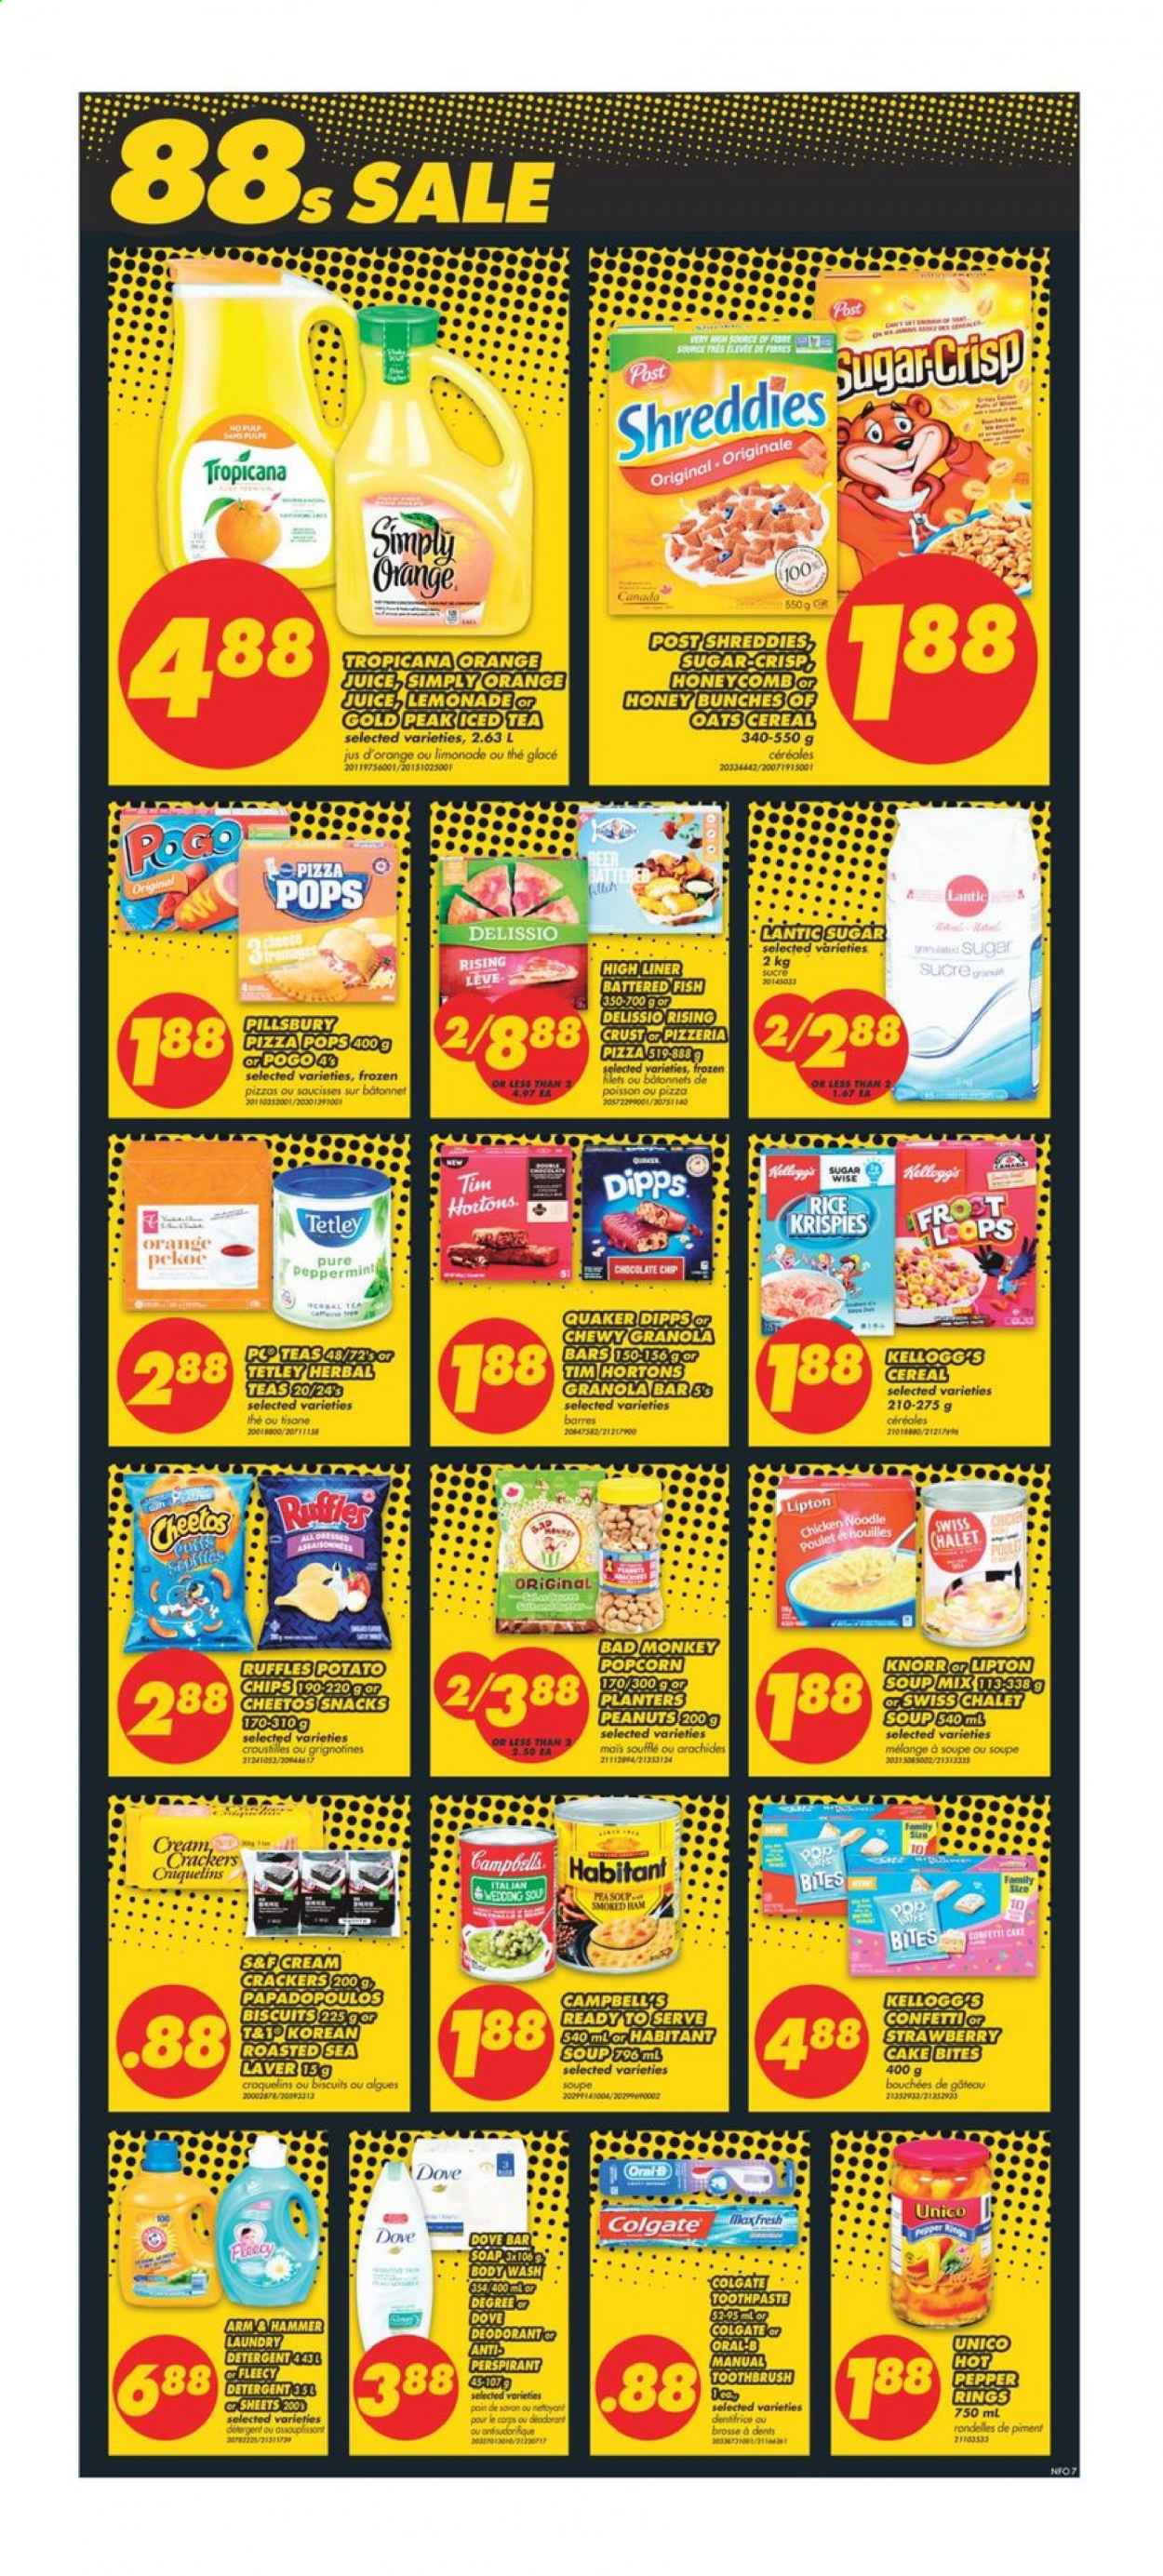 thumbnail - No Frills Flyer - January 14, 2021 - January 20, 2021 - Sales products - cake, fish, Campbell's, pizza, soup mix, soup, Pillsbury, Quaker, noodles, ham, smoked ham, snack, crackers, Kellogg's, biscuit, potato chips, Cheetos, popcorn, Ruffles, sugar, cereals, granola bar, Rice Krispies, peanuts, Planters, lemonade, orange juice, juice, ice tea, beer, laundry detergent, Rin, body wash, soap bar, soap, toothbrush, toothpaste, anti-perspirant, hammer, monkey, Knorr, Oral-B, deodorant. Page 7.